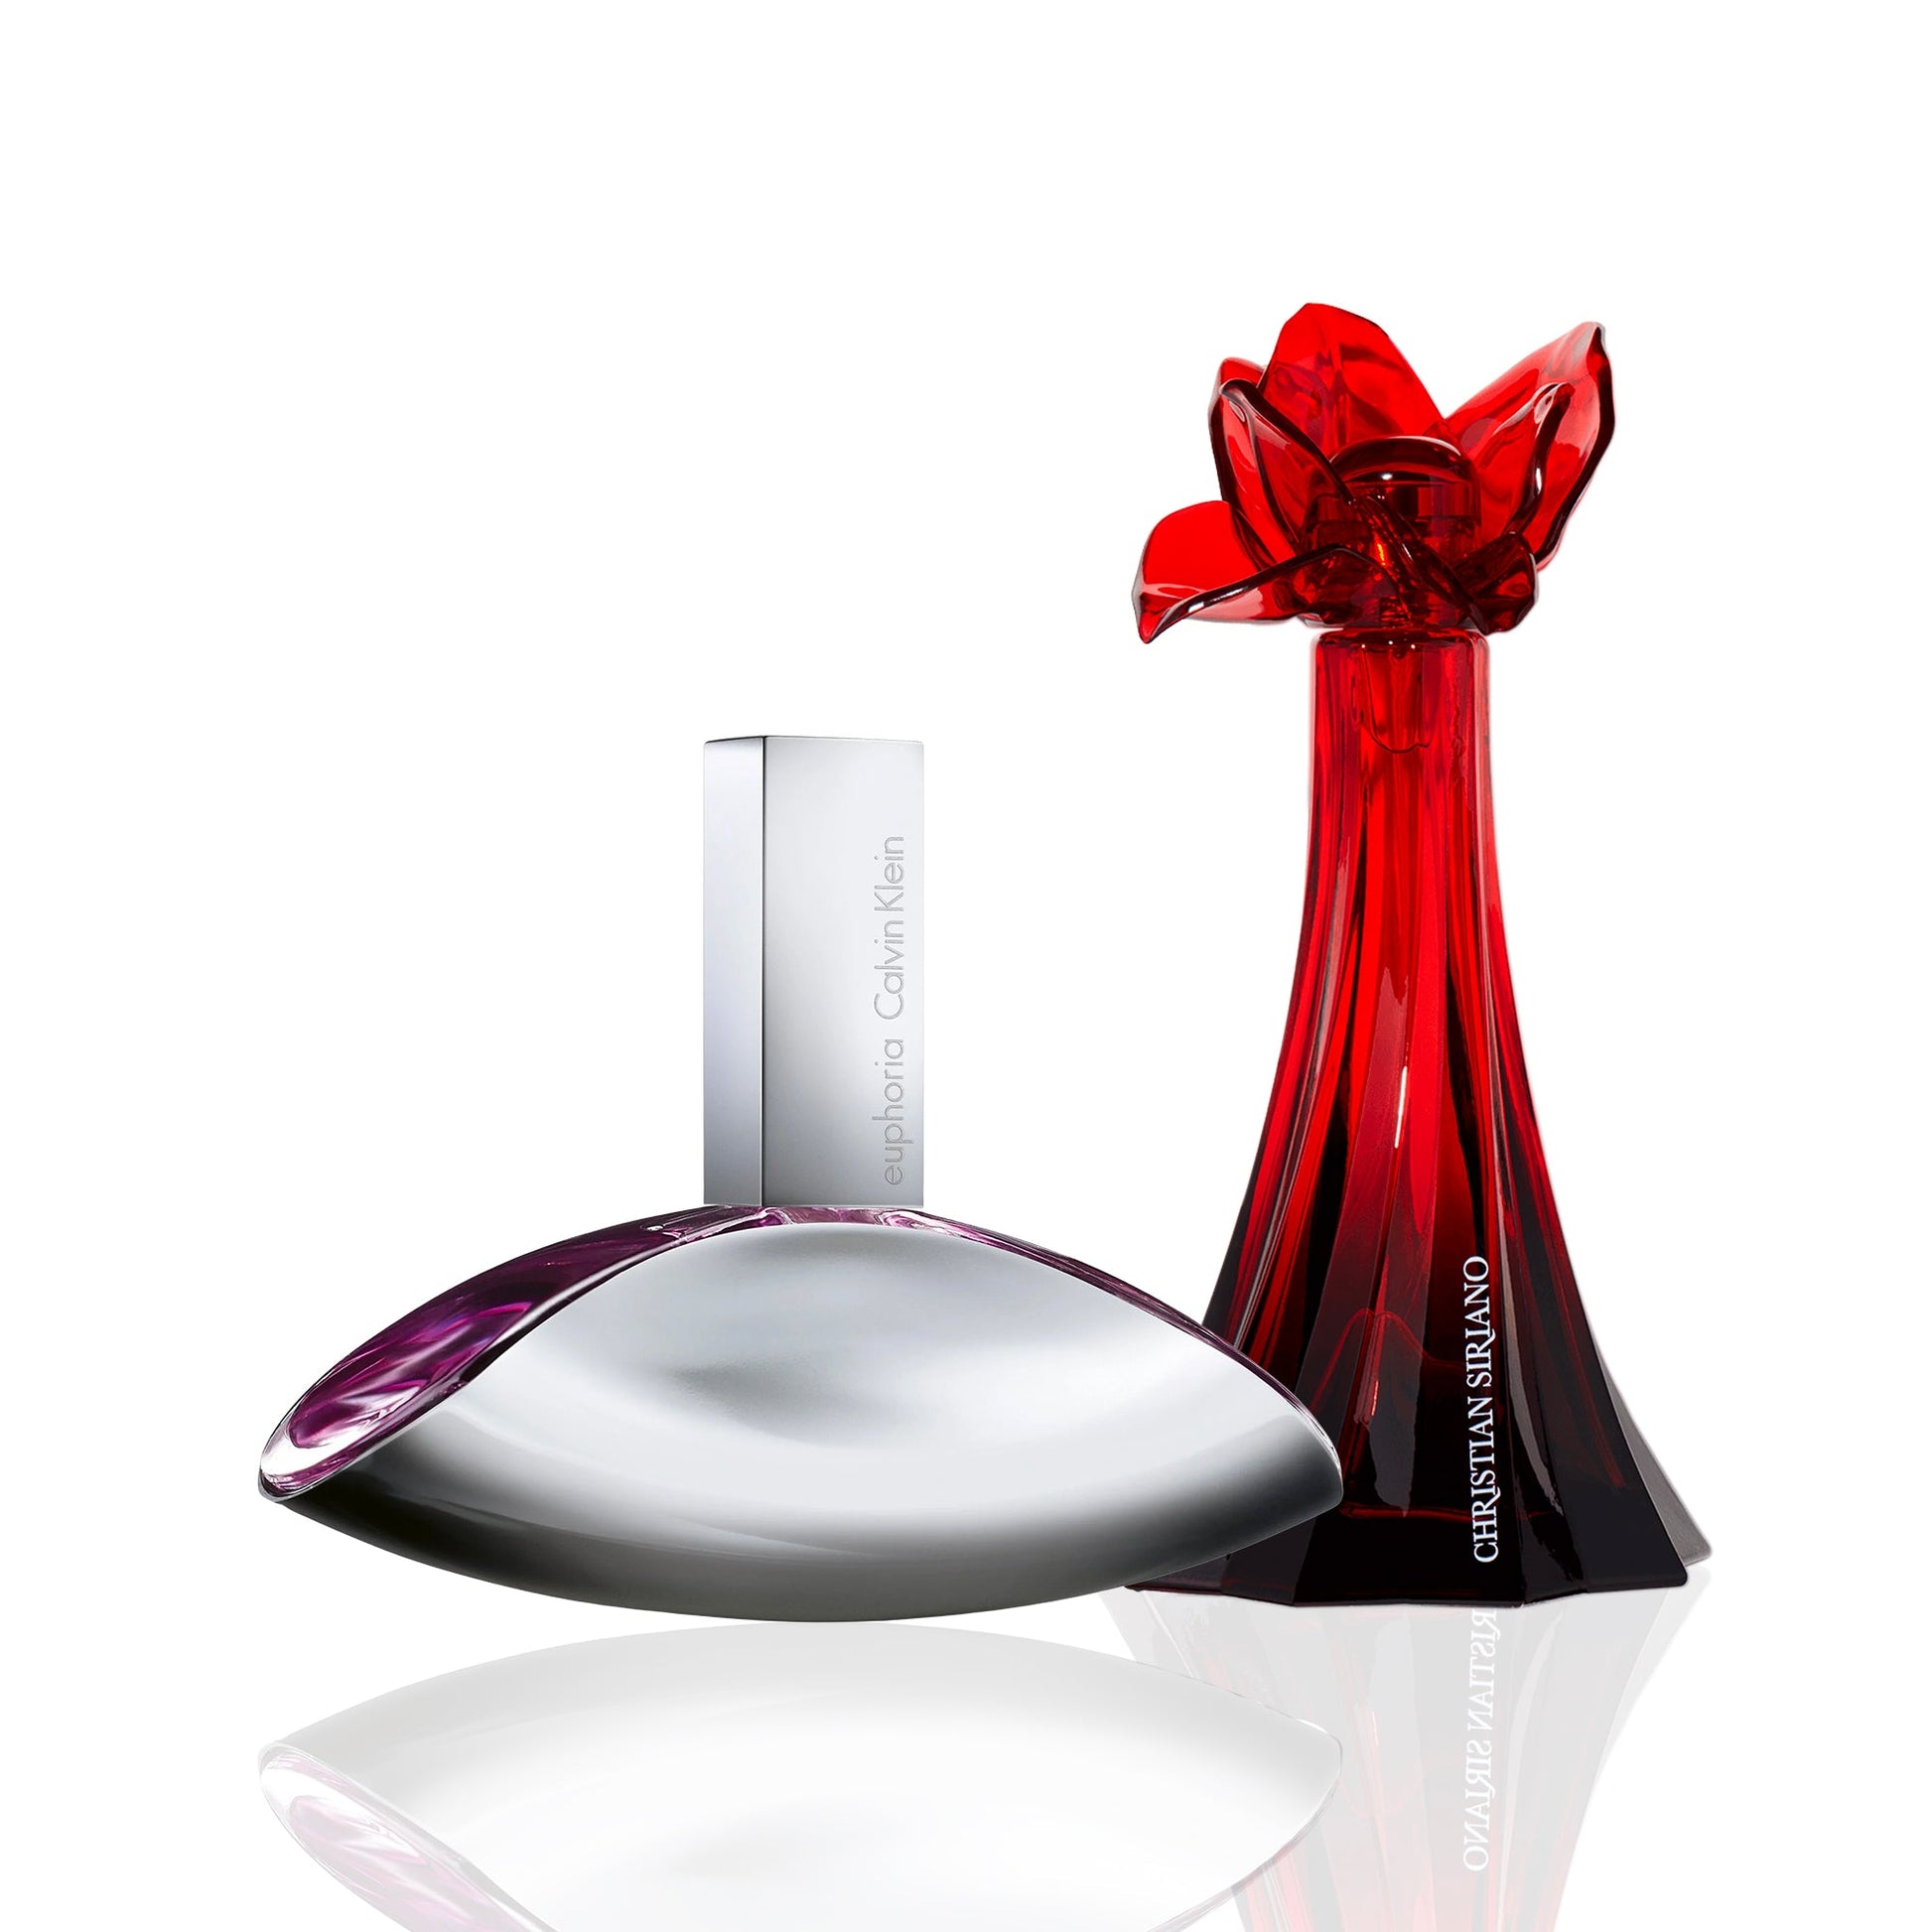 Bundle Deal For Women: Euphoria by Calvin Klein and Ooh La Rouge by Christian Siriano, Product image 1